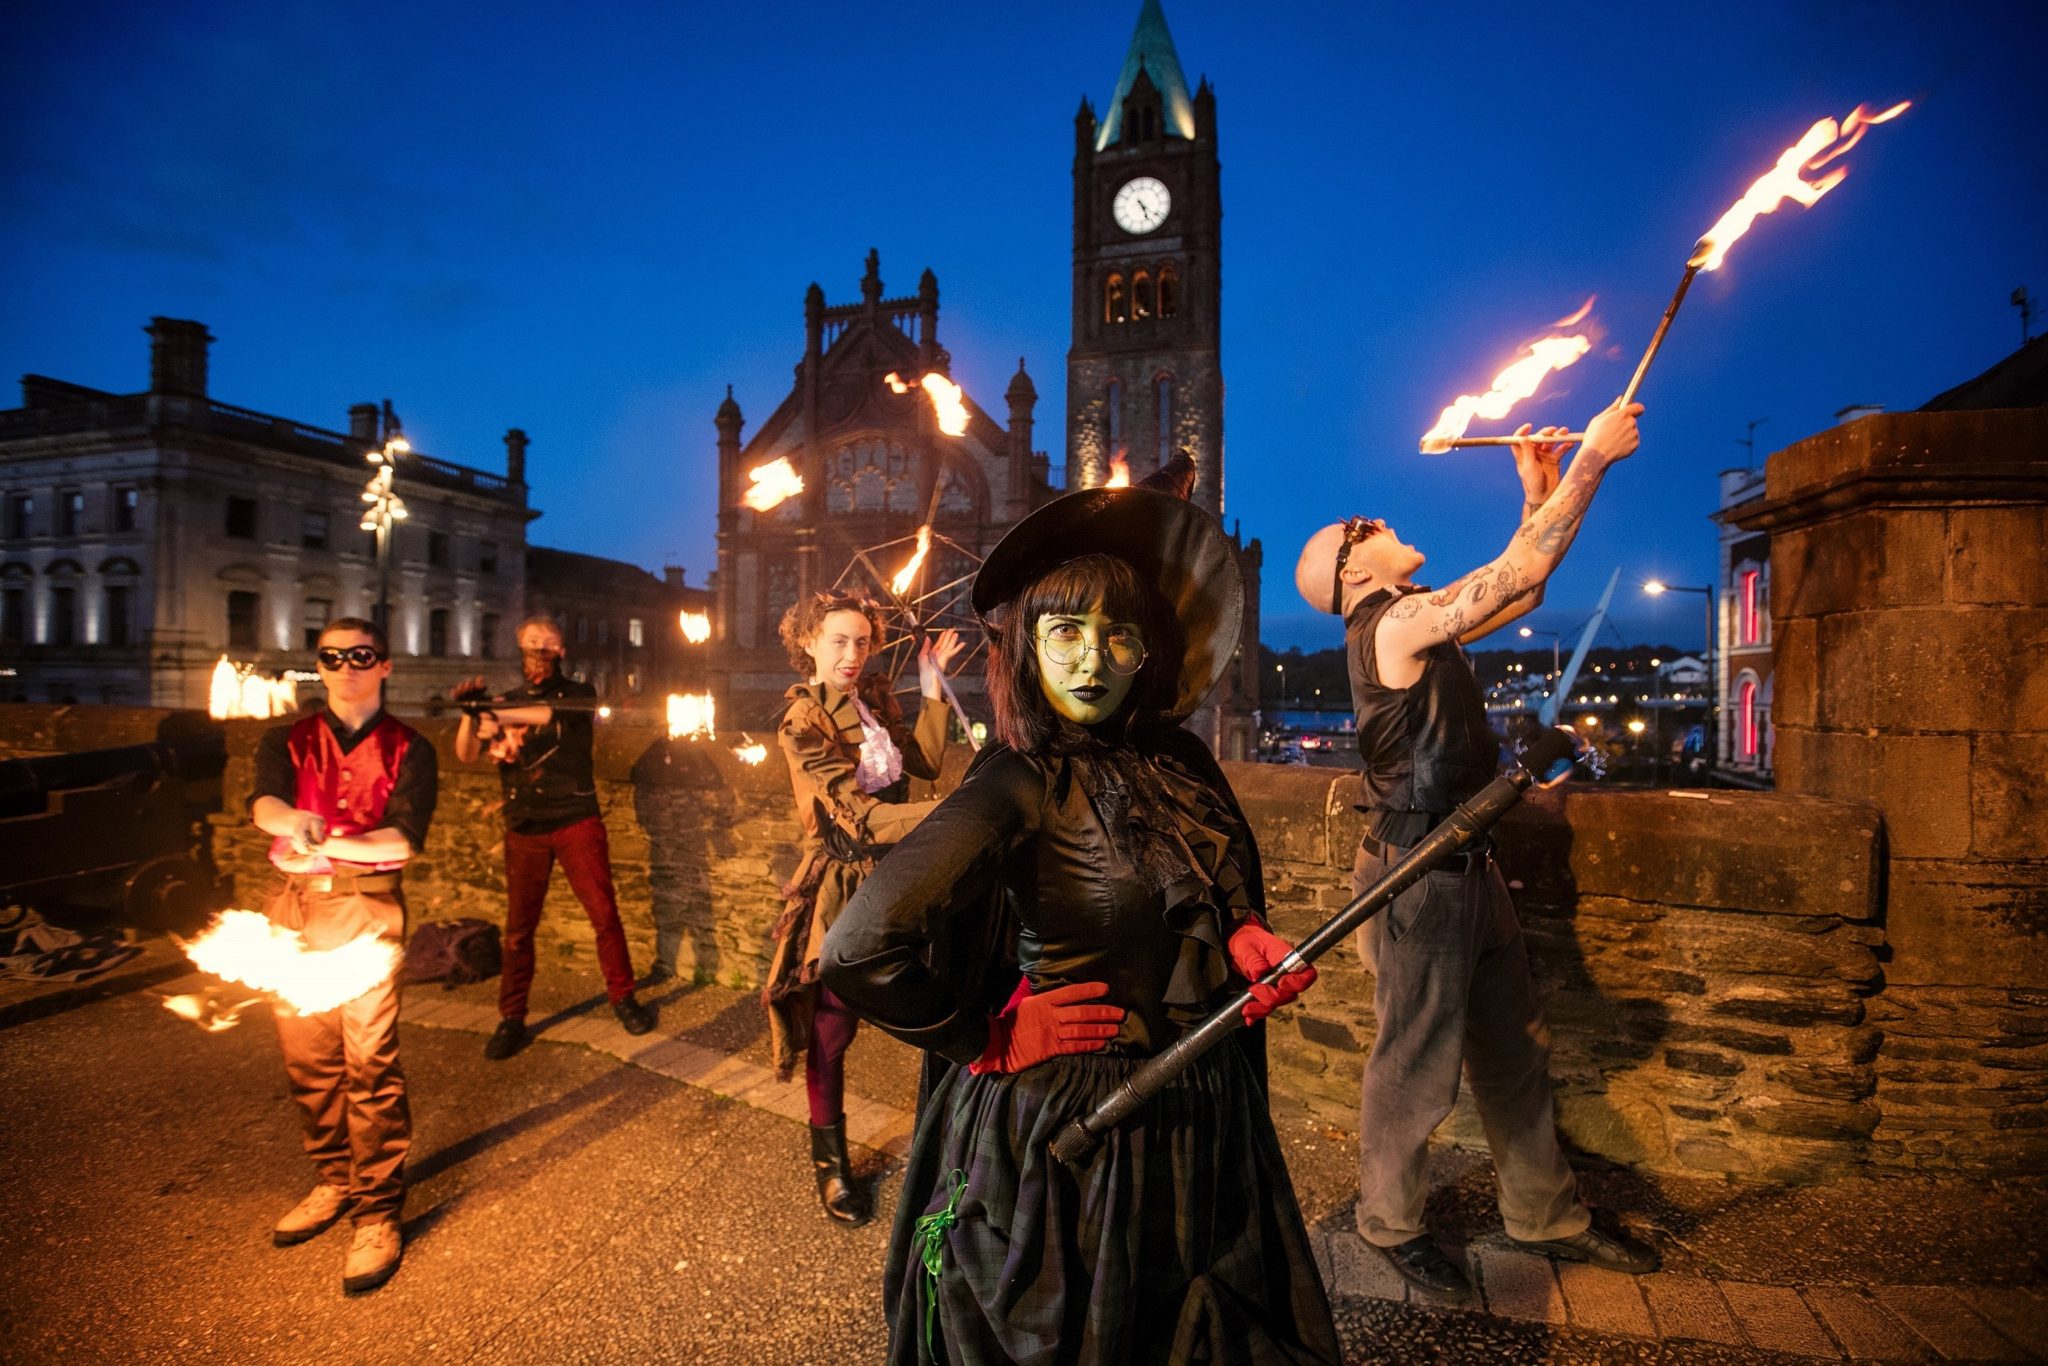 Elaine Show Looks At Halloween Things To Do In Ireland Holiday And Travel Expert Advice With The Novel Traveller